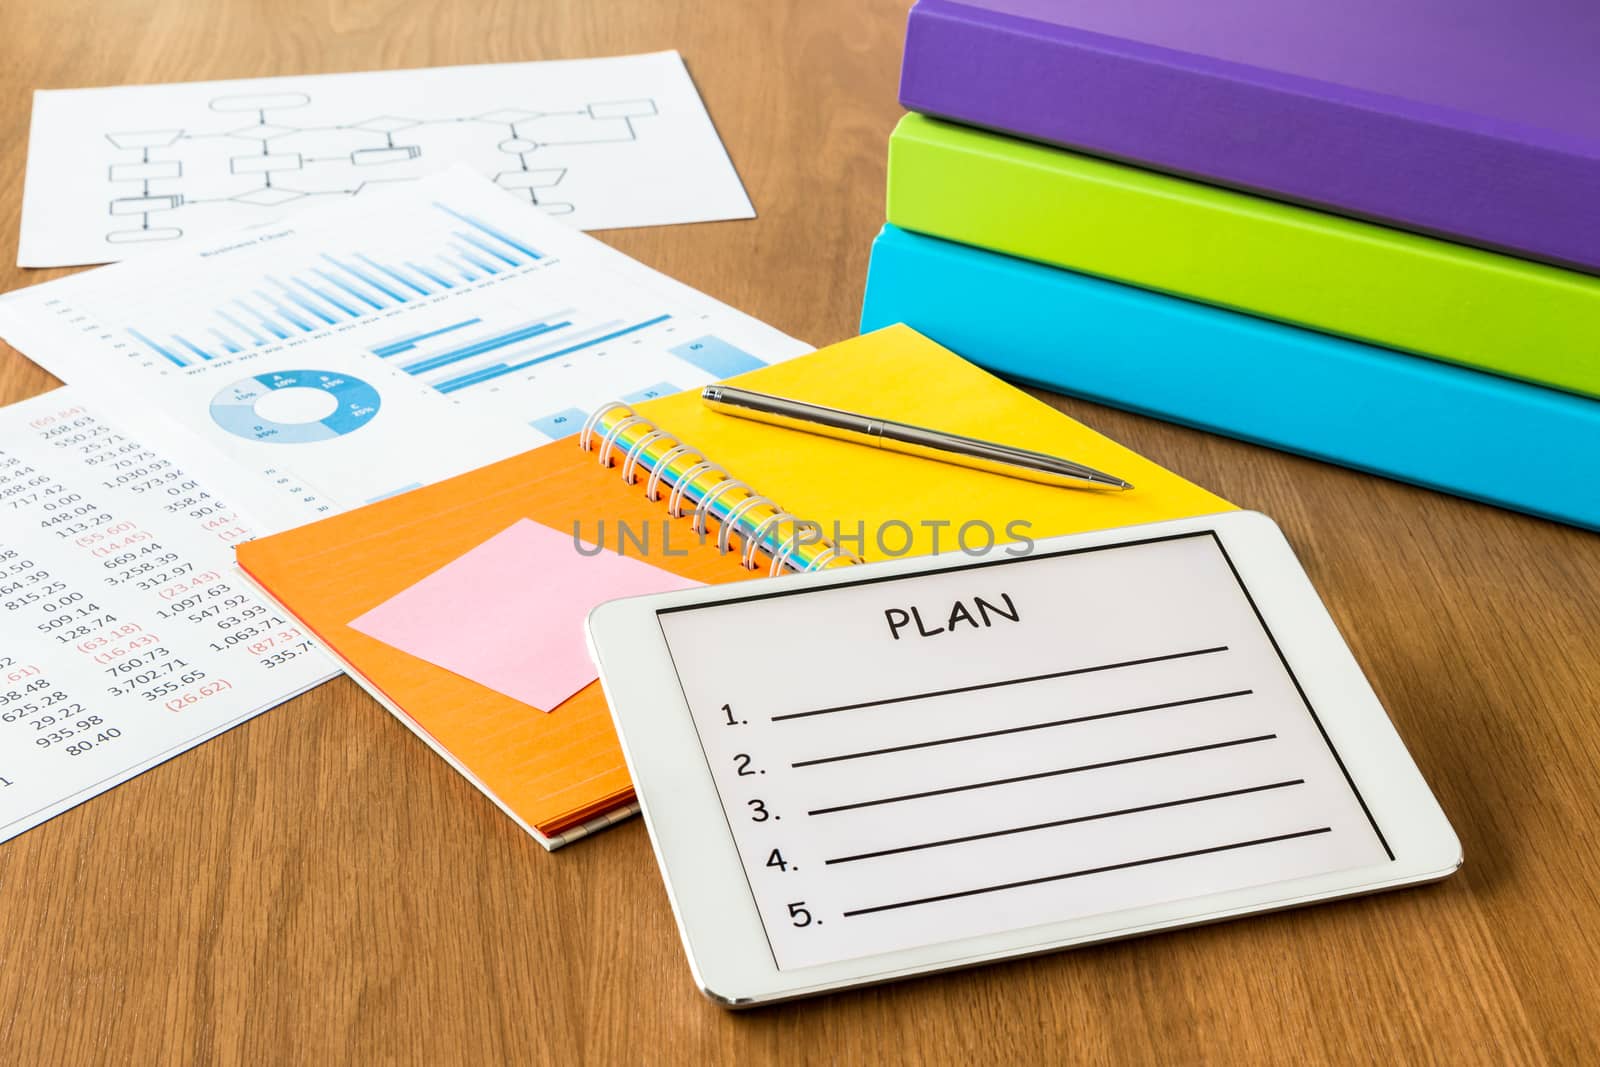 Digital tablet pc showing blank form of project planning on a display screen, colorful diary book, binders and documents on workspace